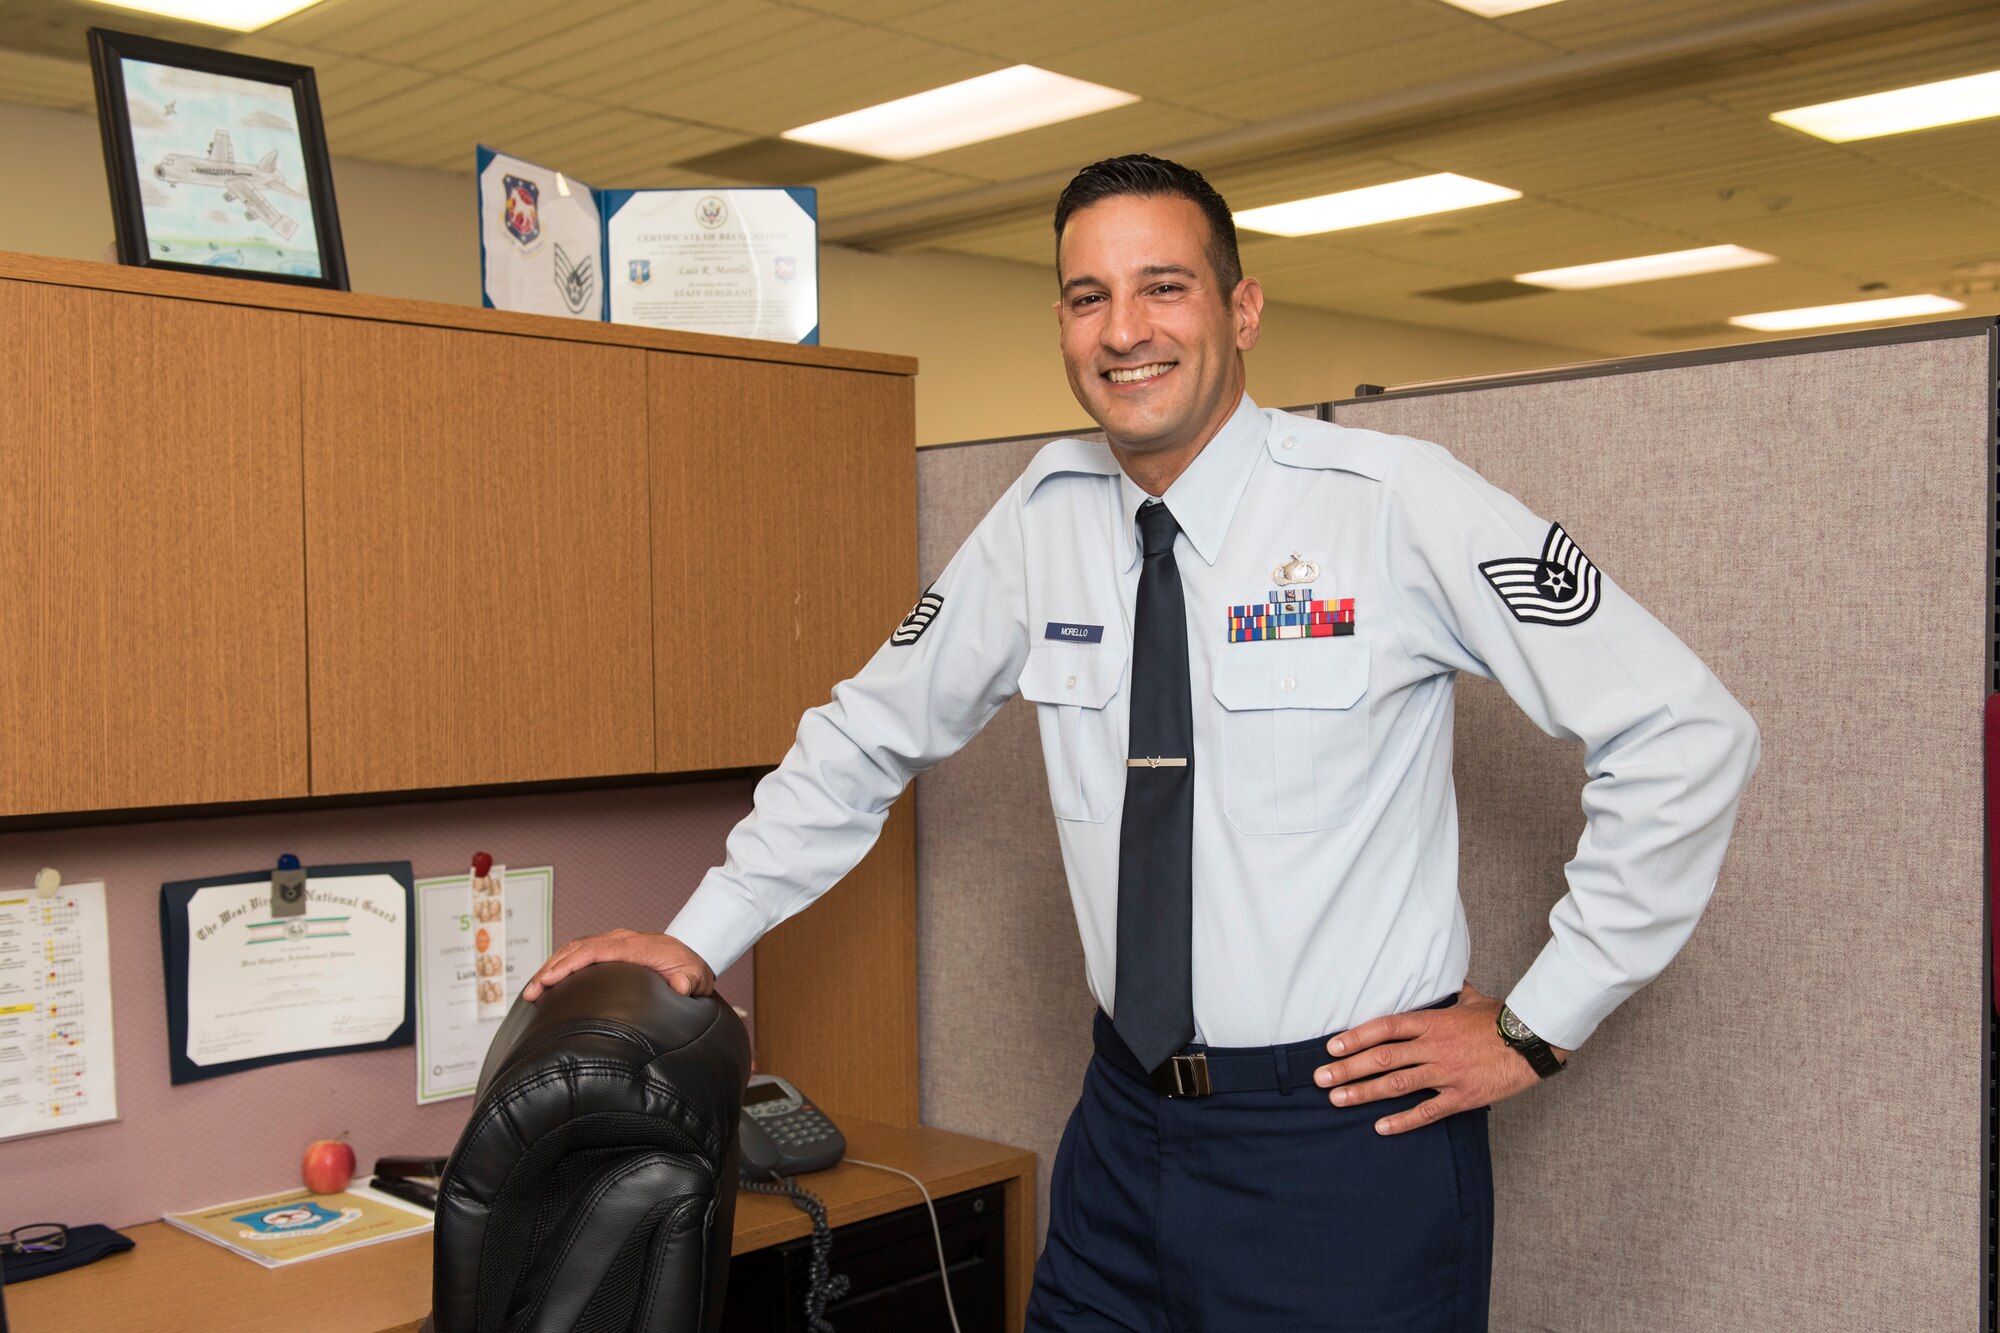 Tech. Sgt. Luis Morello is the quality assurance manager for the 167th Comptroller Flight and the 167th Airlift Wing Airman Spotlight for September 2020.